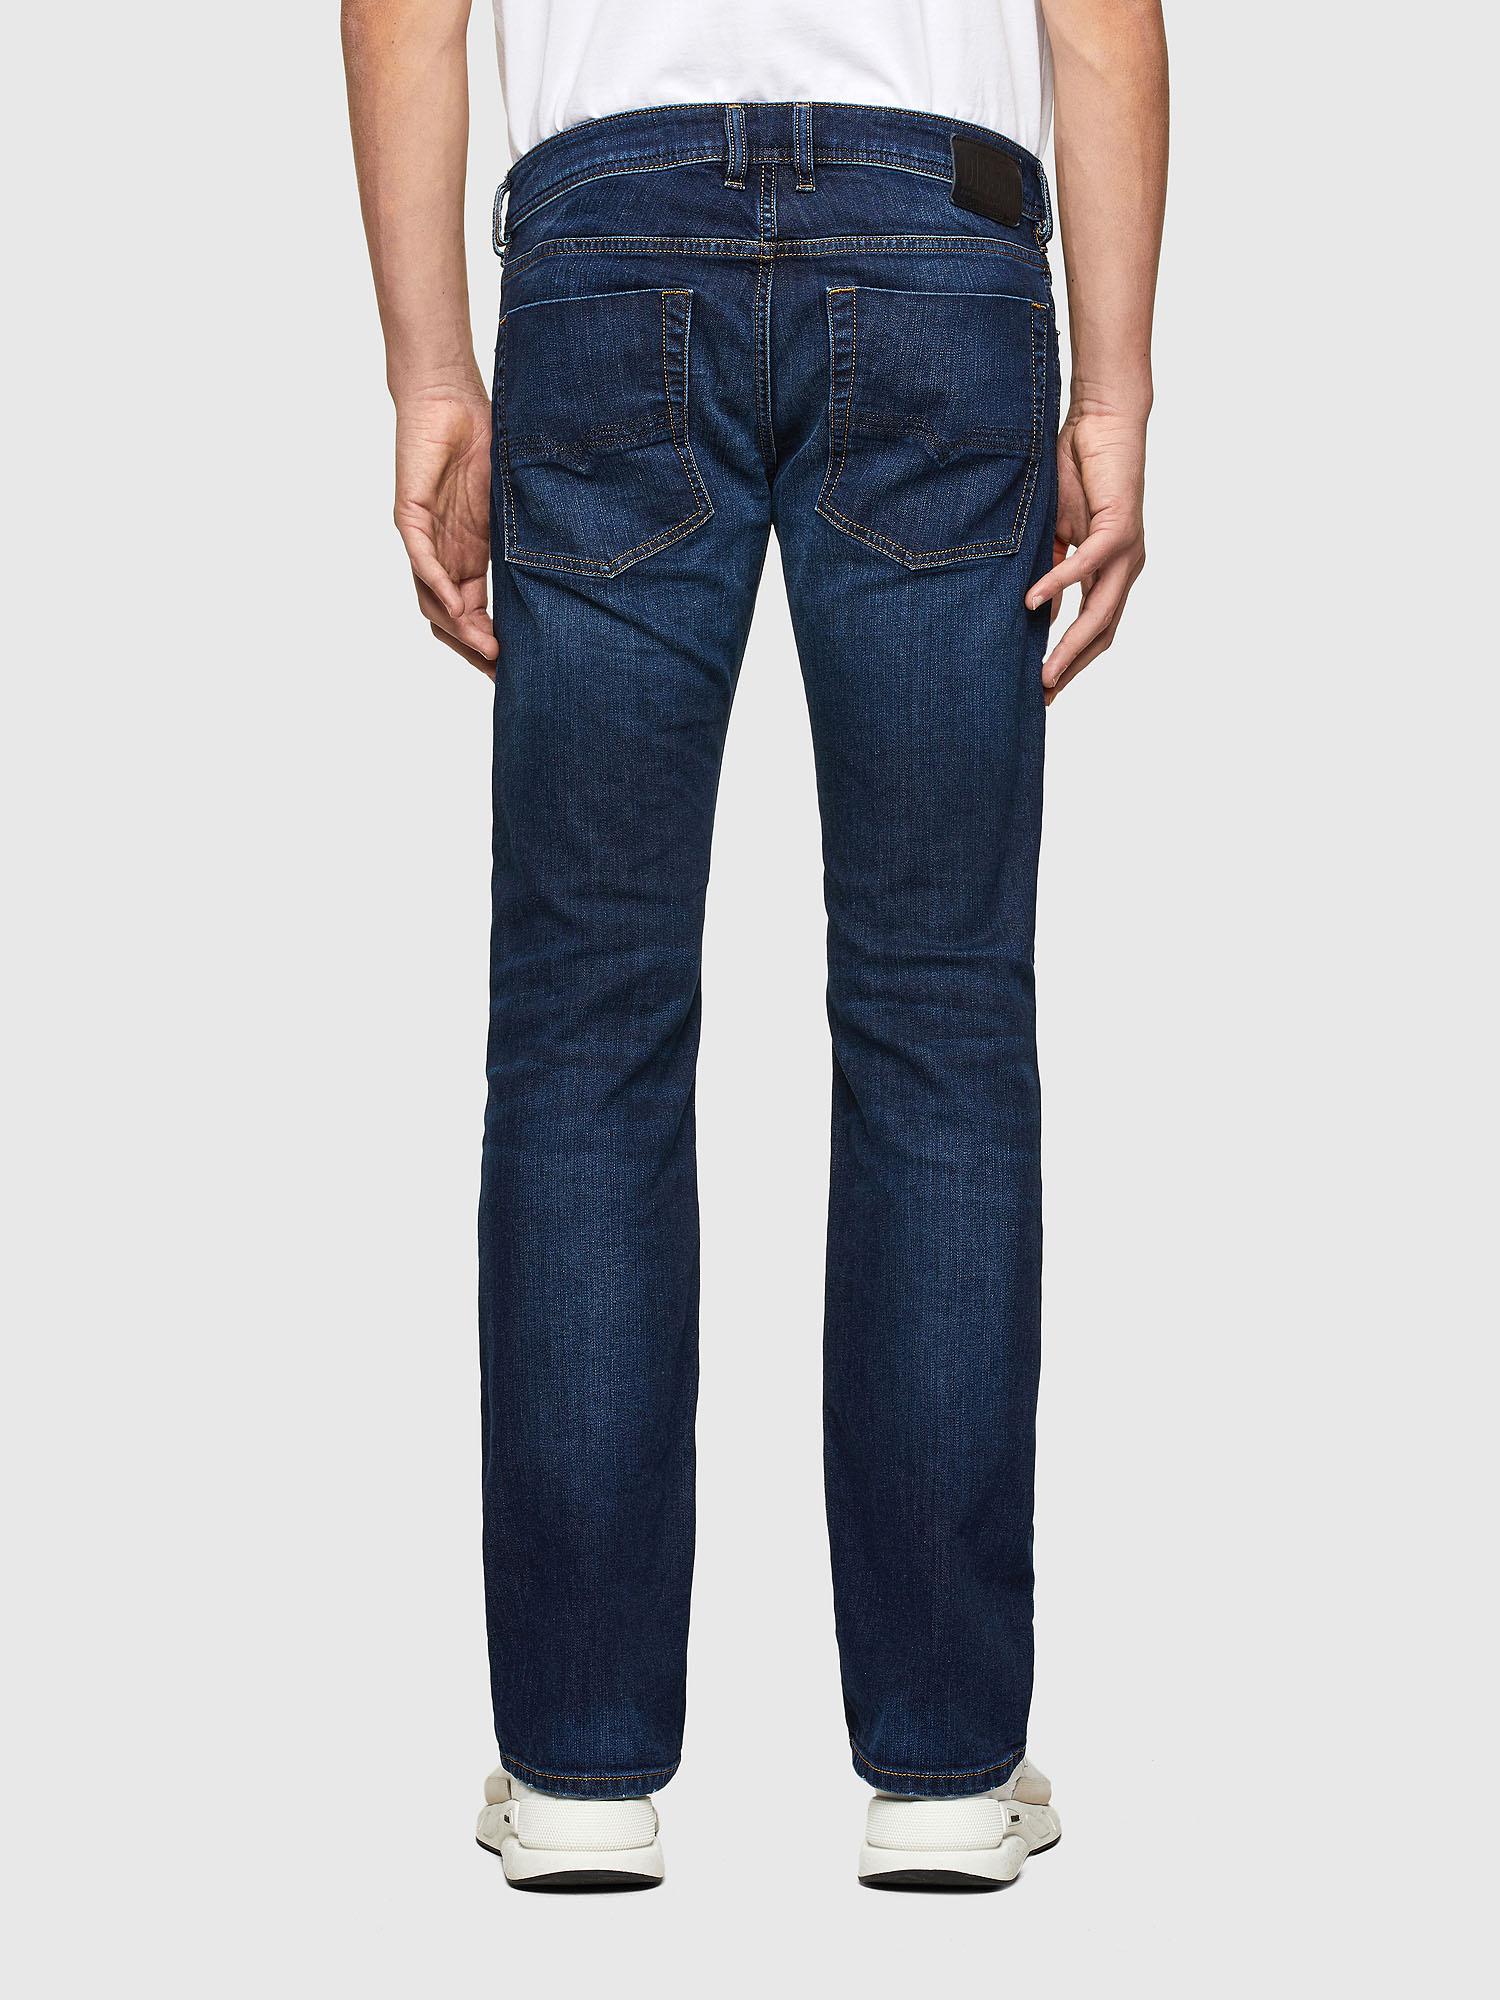 Diesel - Zatiny 082AY Bootcut Jeans,  - Image 3